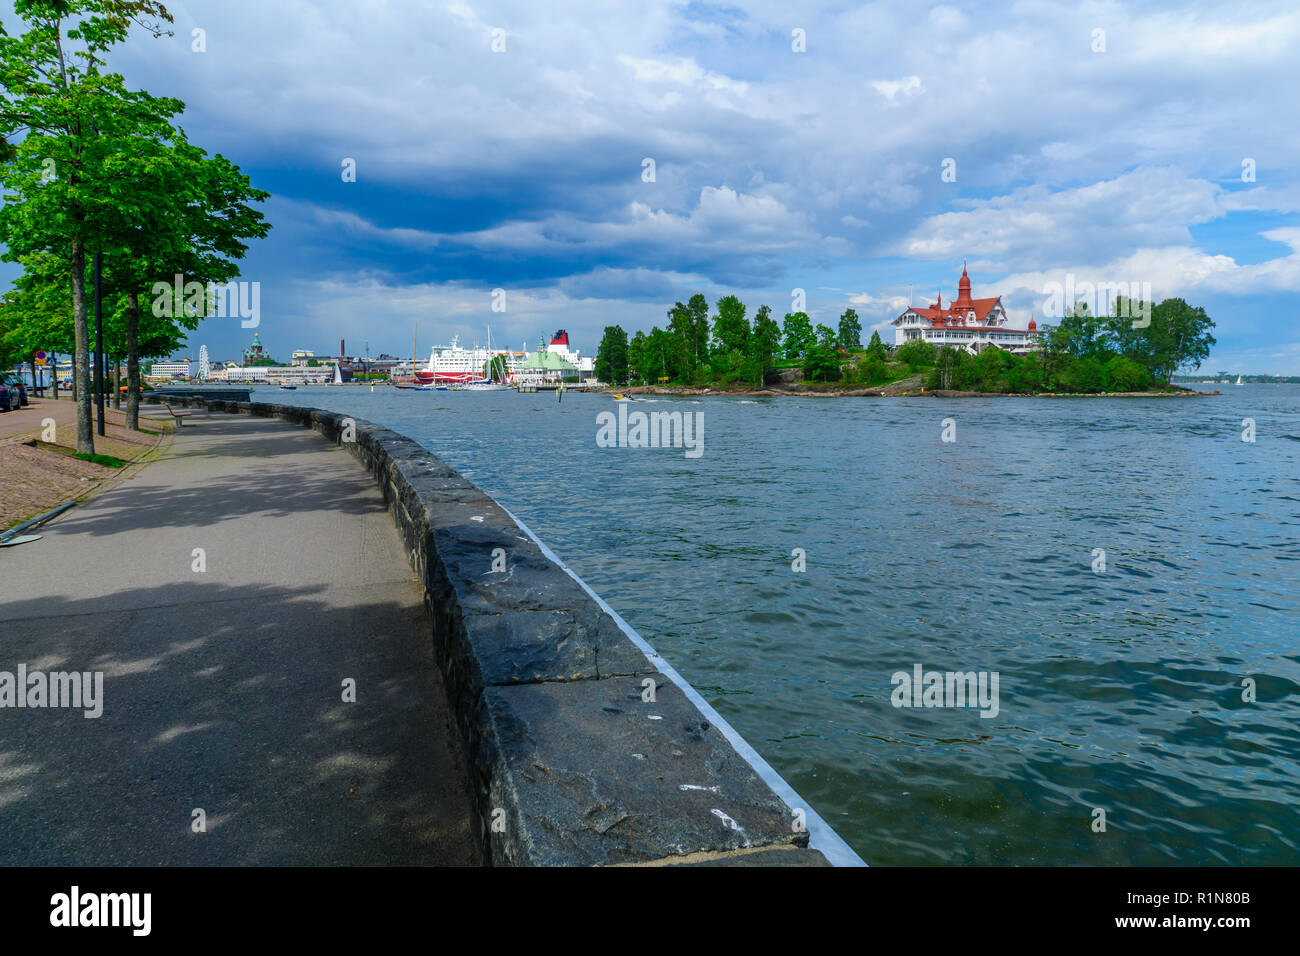 View of the Luoto island, with the promenade, ferry boats, the Russian Orthodox Uspenski Cathedral, and the SkyWheel in Helsinki, Finland Stock Photo